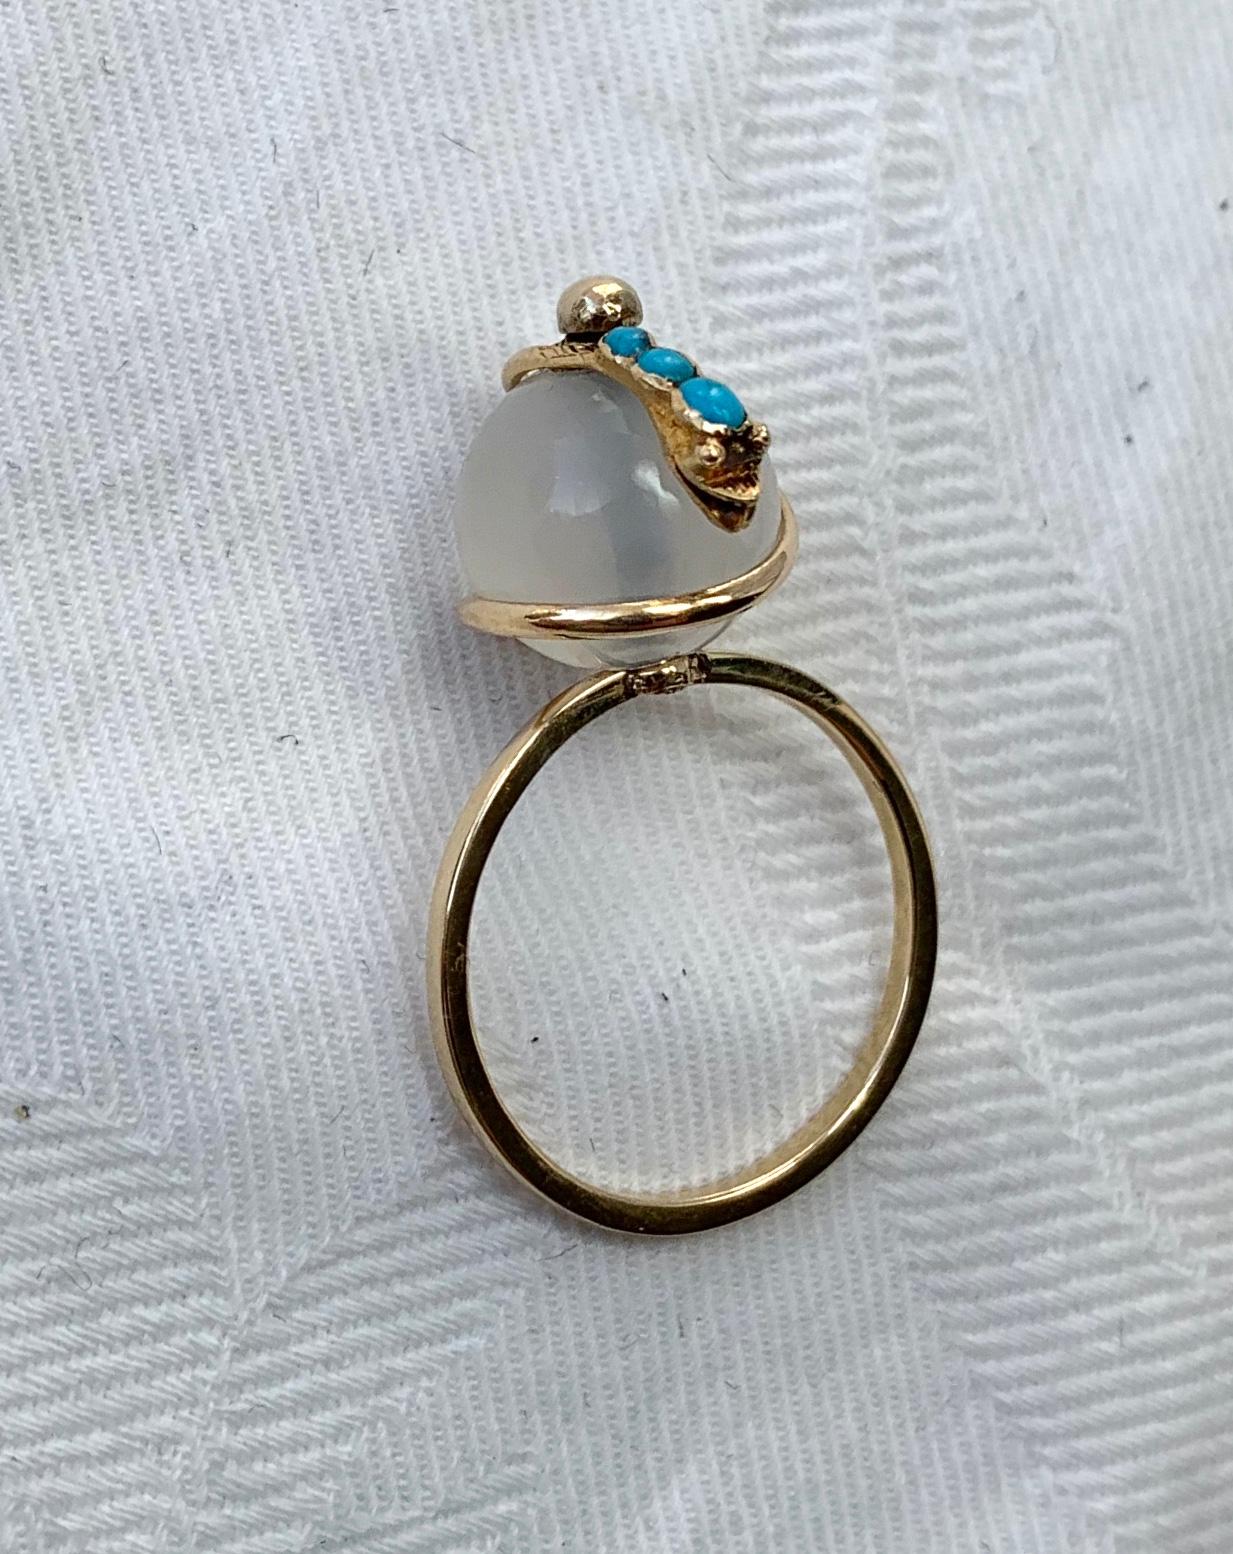 
This is a rare and wonderful antique Victorian Turquoise Moonstone Snake Ring.  The snake is depicted circling the globe or an egg. 
The snake is set with beautiful Persian Turquoise cabochons.  The globe is either moonstone or white agate.  The